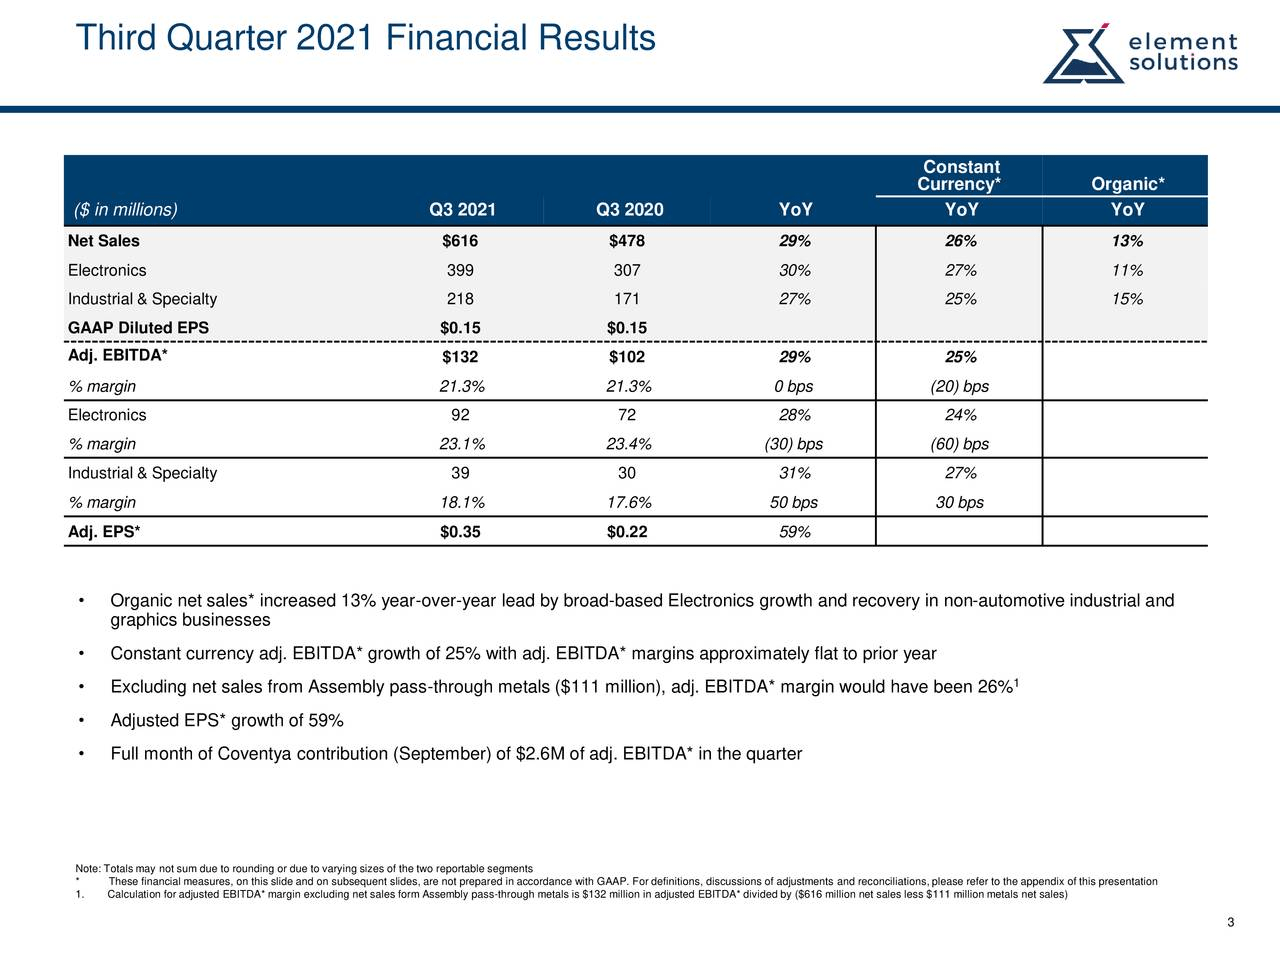 Element Solutions Q3 2021 Financial Results